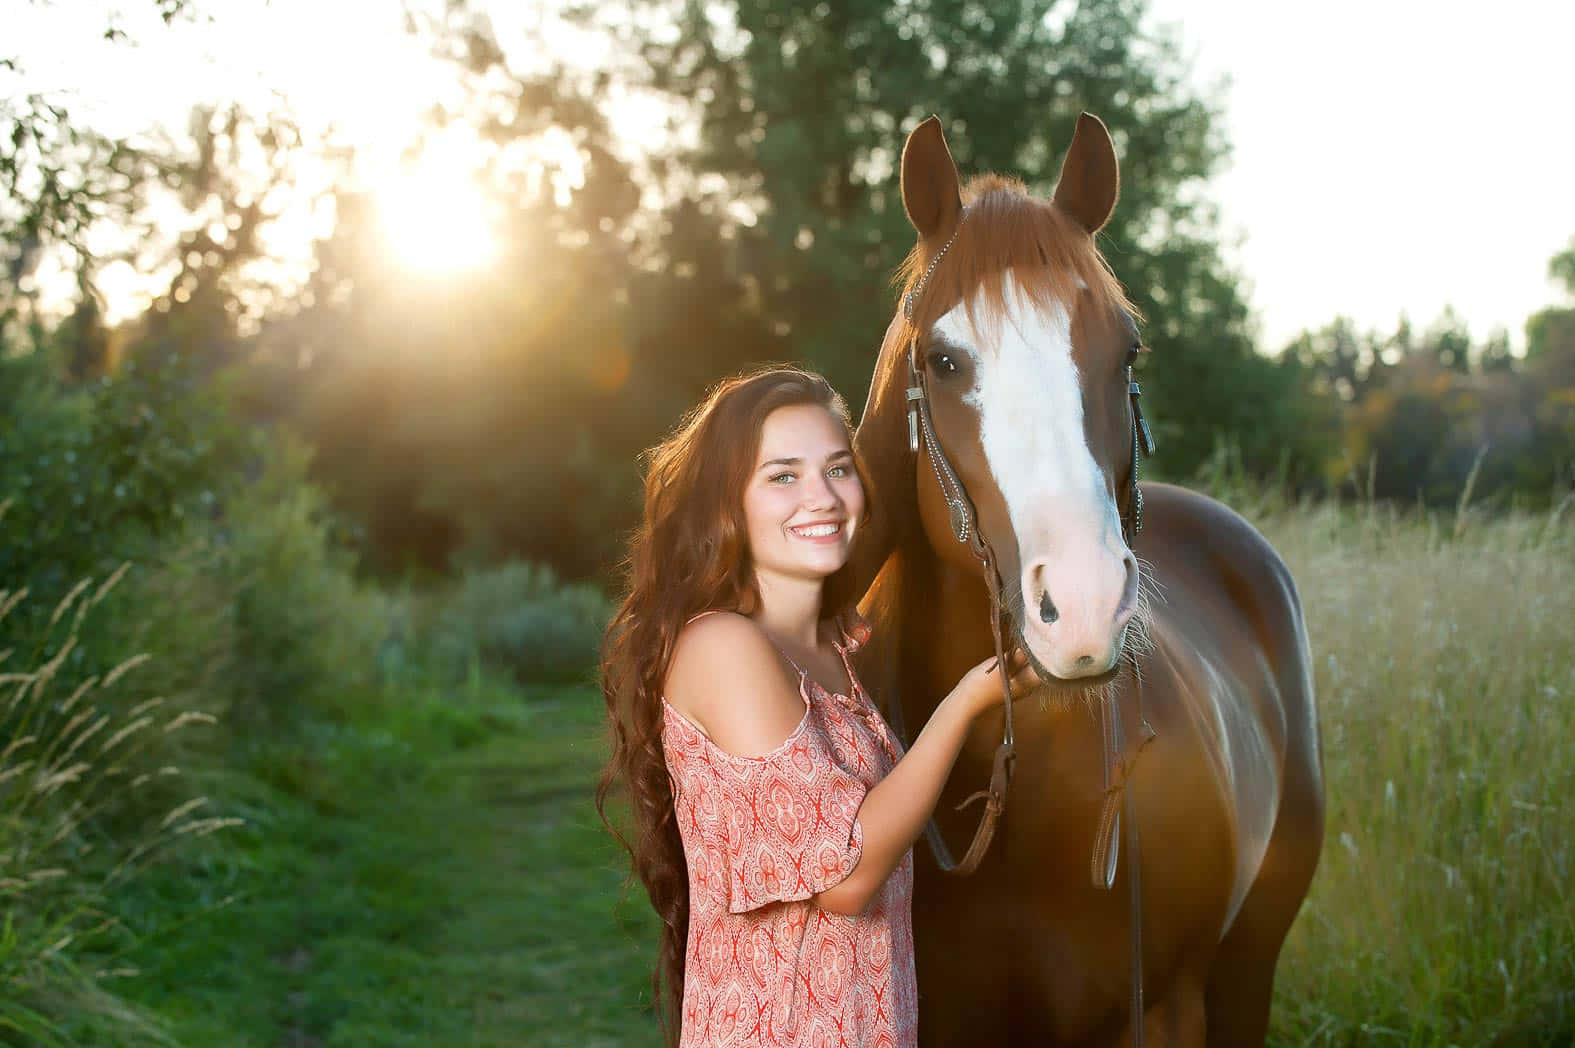 A Girl Poses With A Horse In A Field Wallpaper